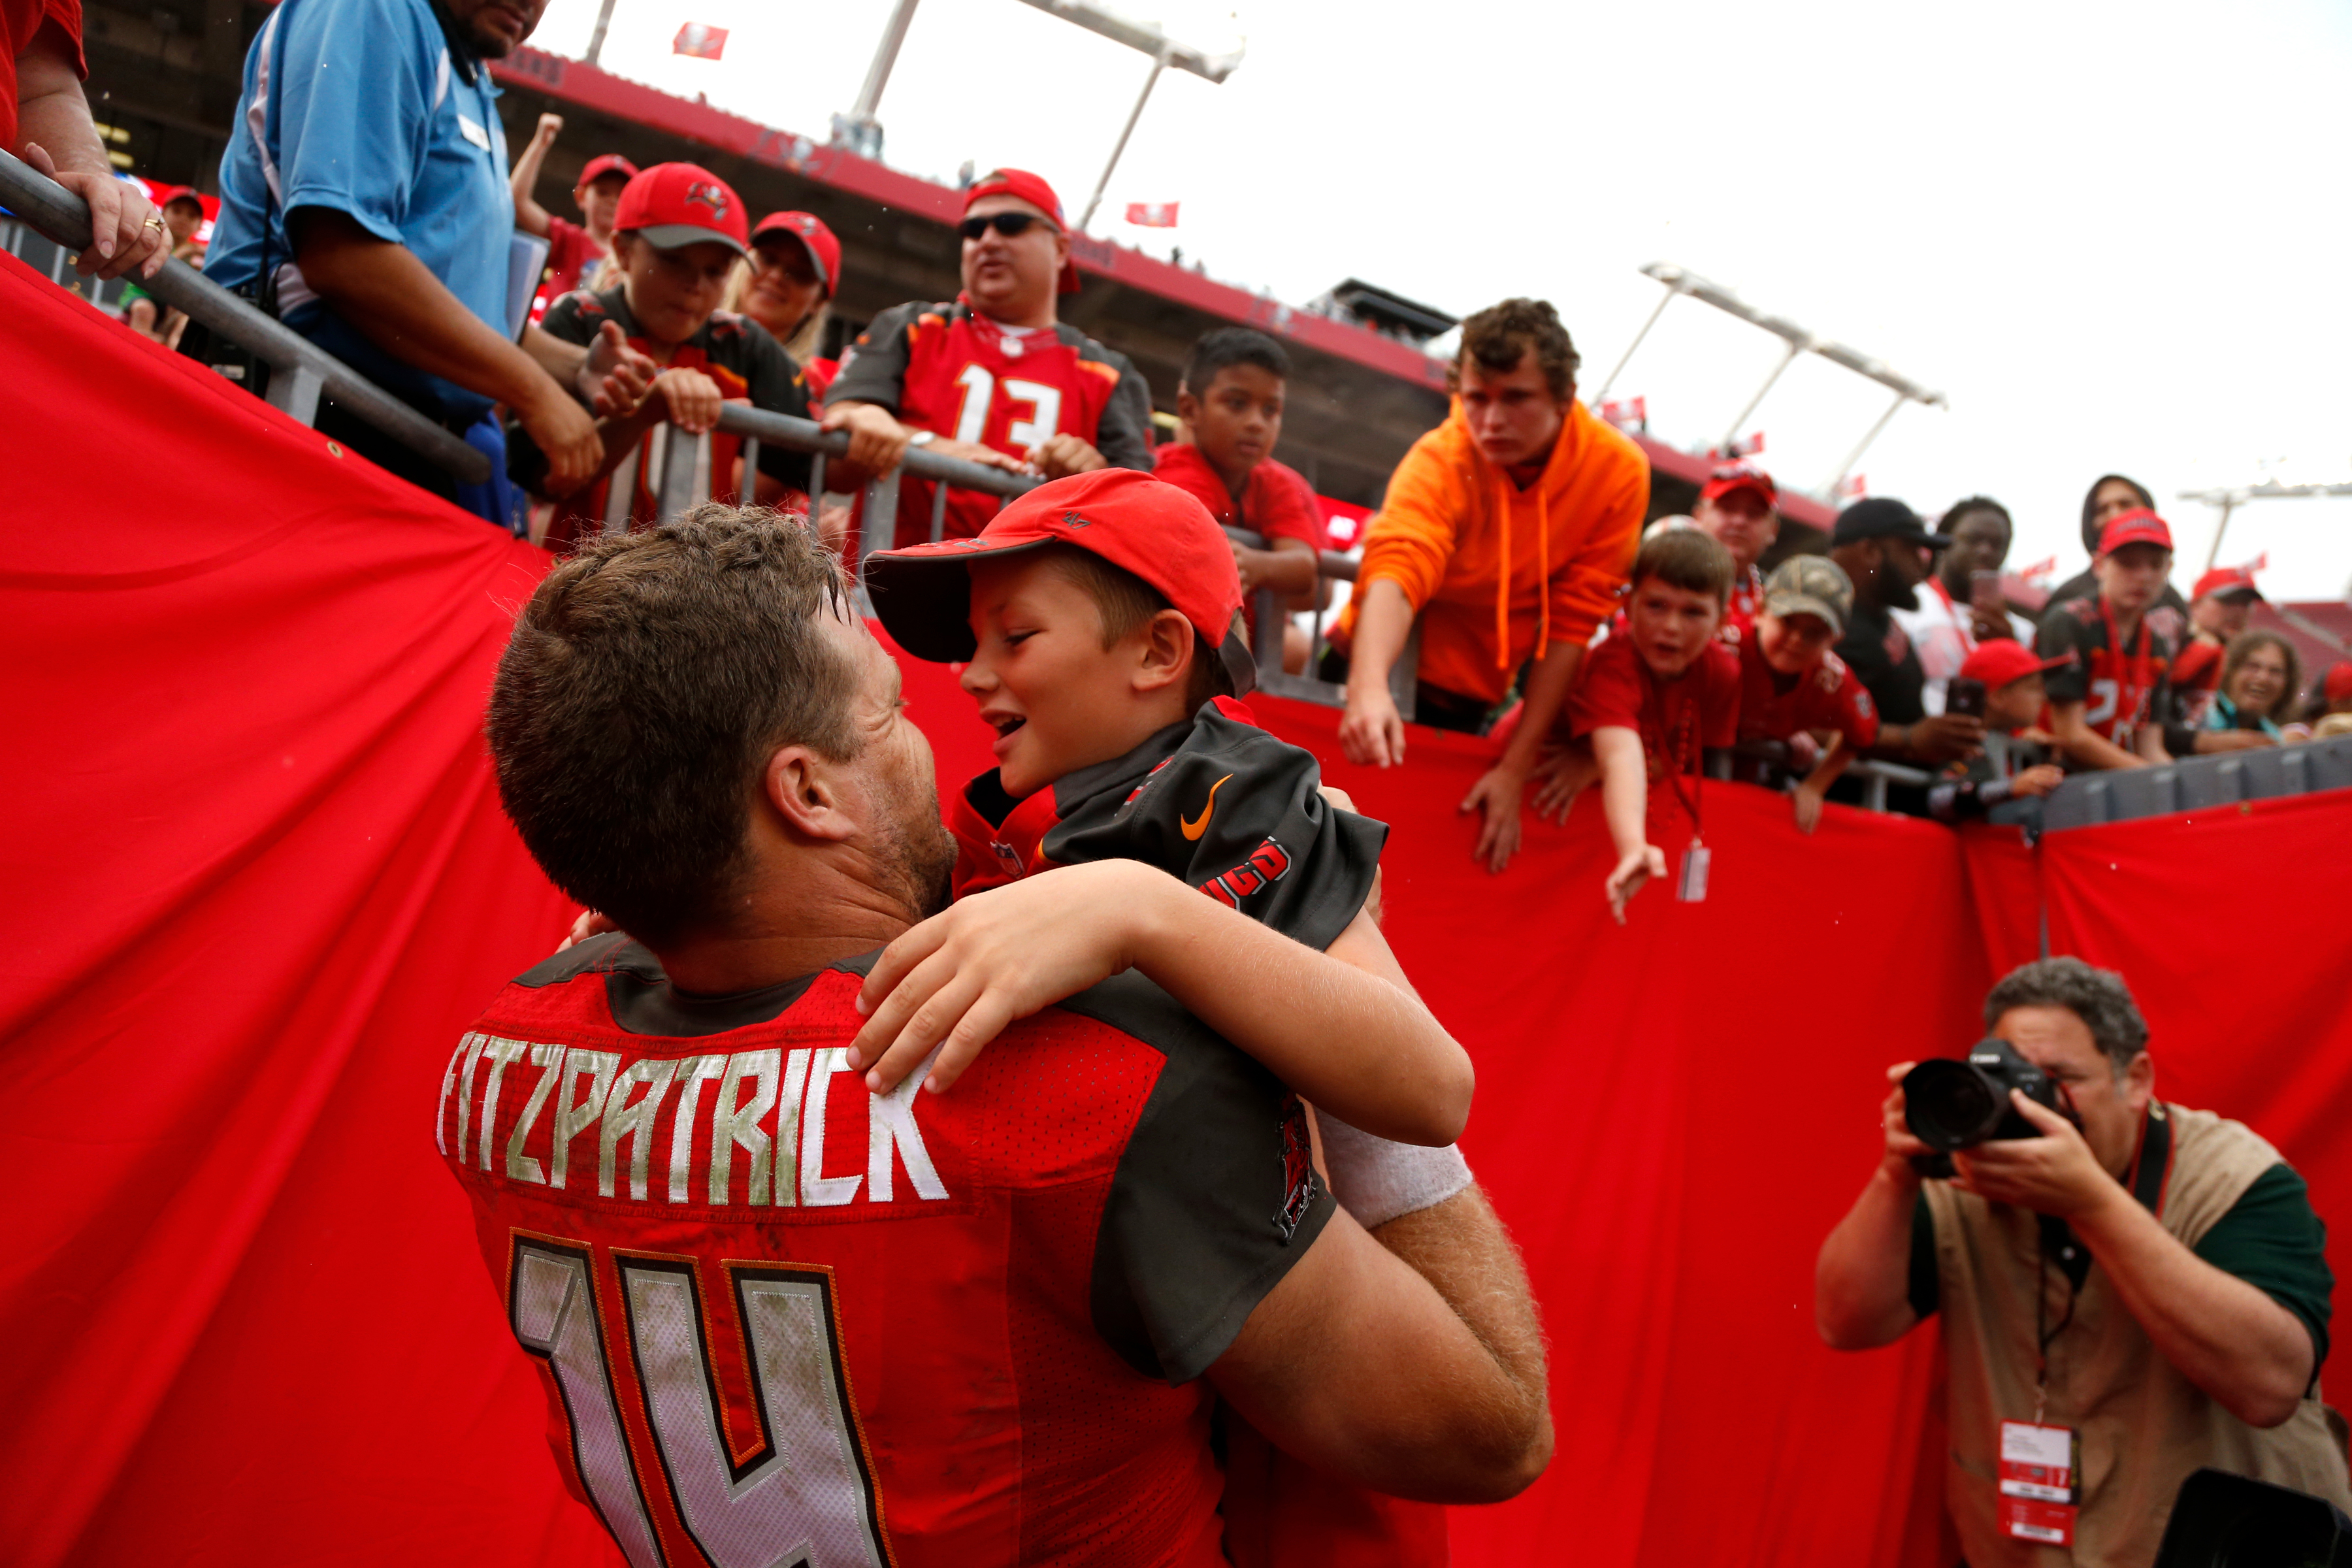 Ryan Fitzpatrick pulls one of his children out of the stands after an NFL football game on November 12, 2017, in Tampa, Florida | Source: Getty Images